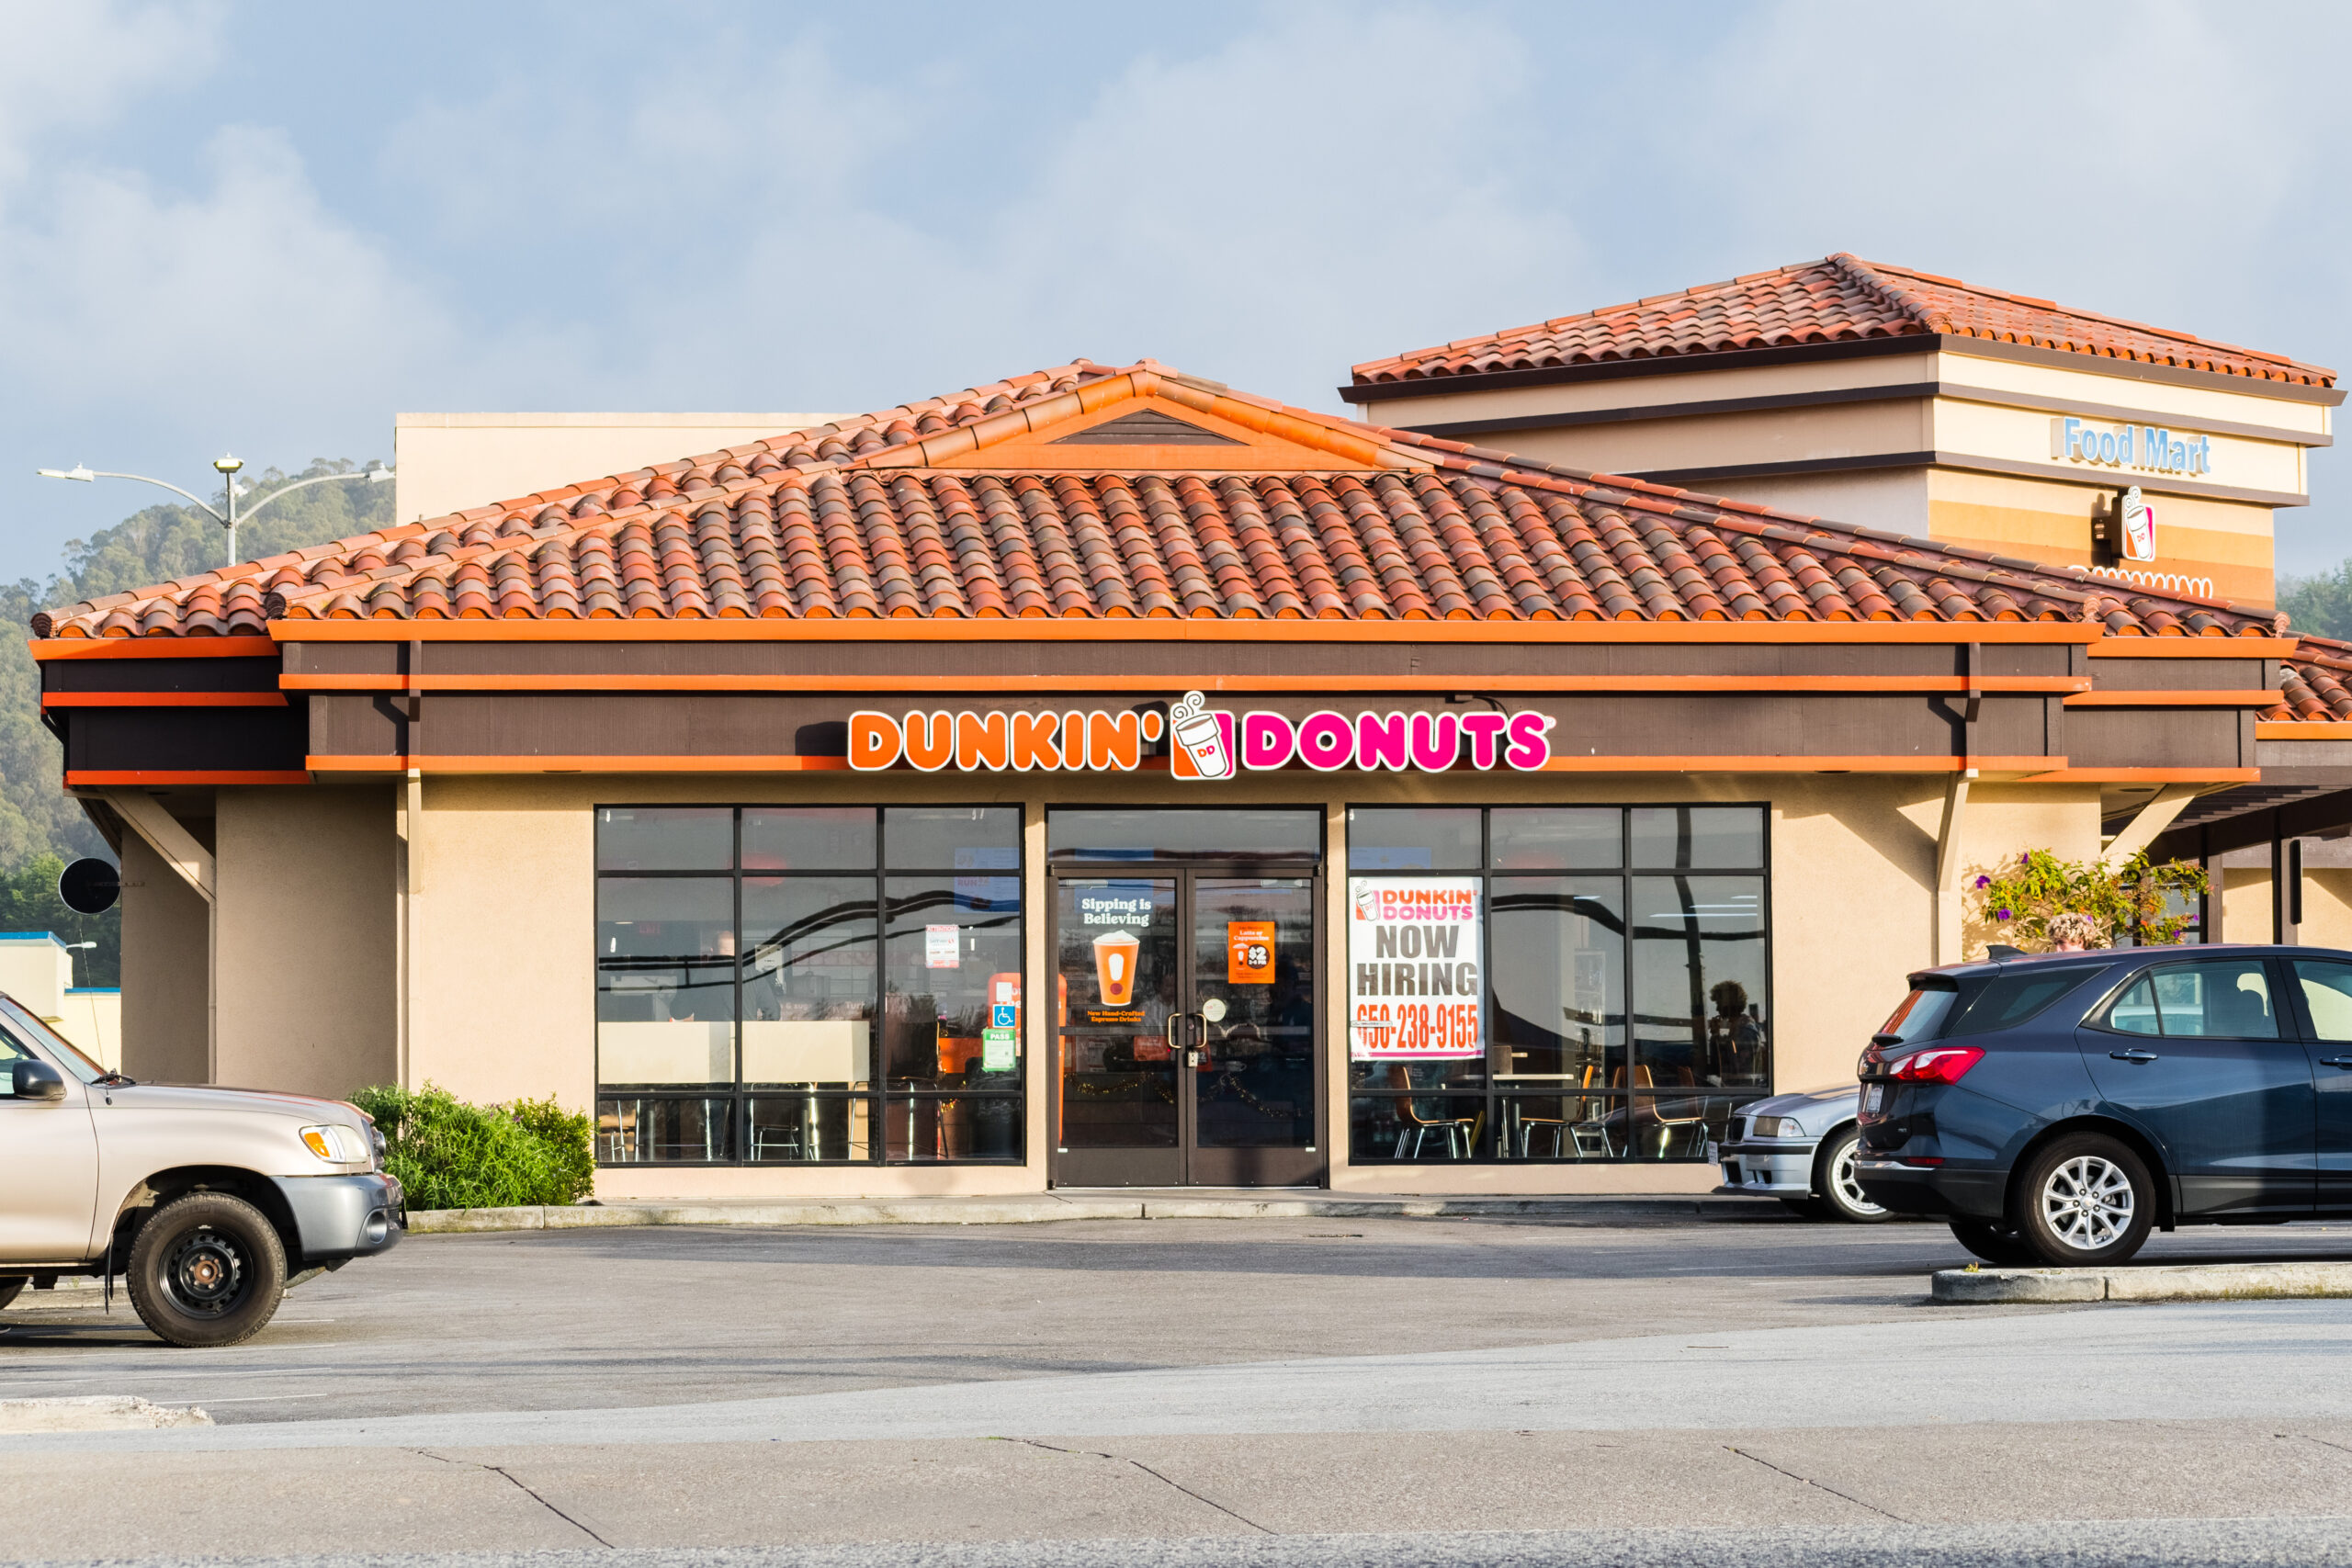 Dunkin Donuts - Hired California On-Site Welders in 2017